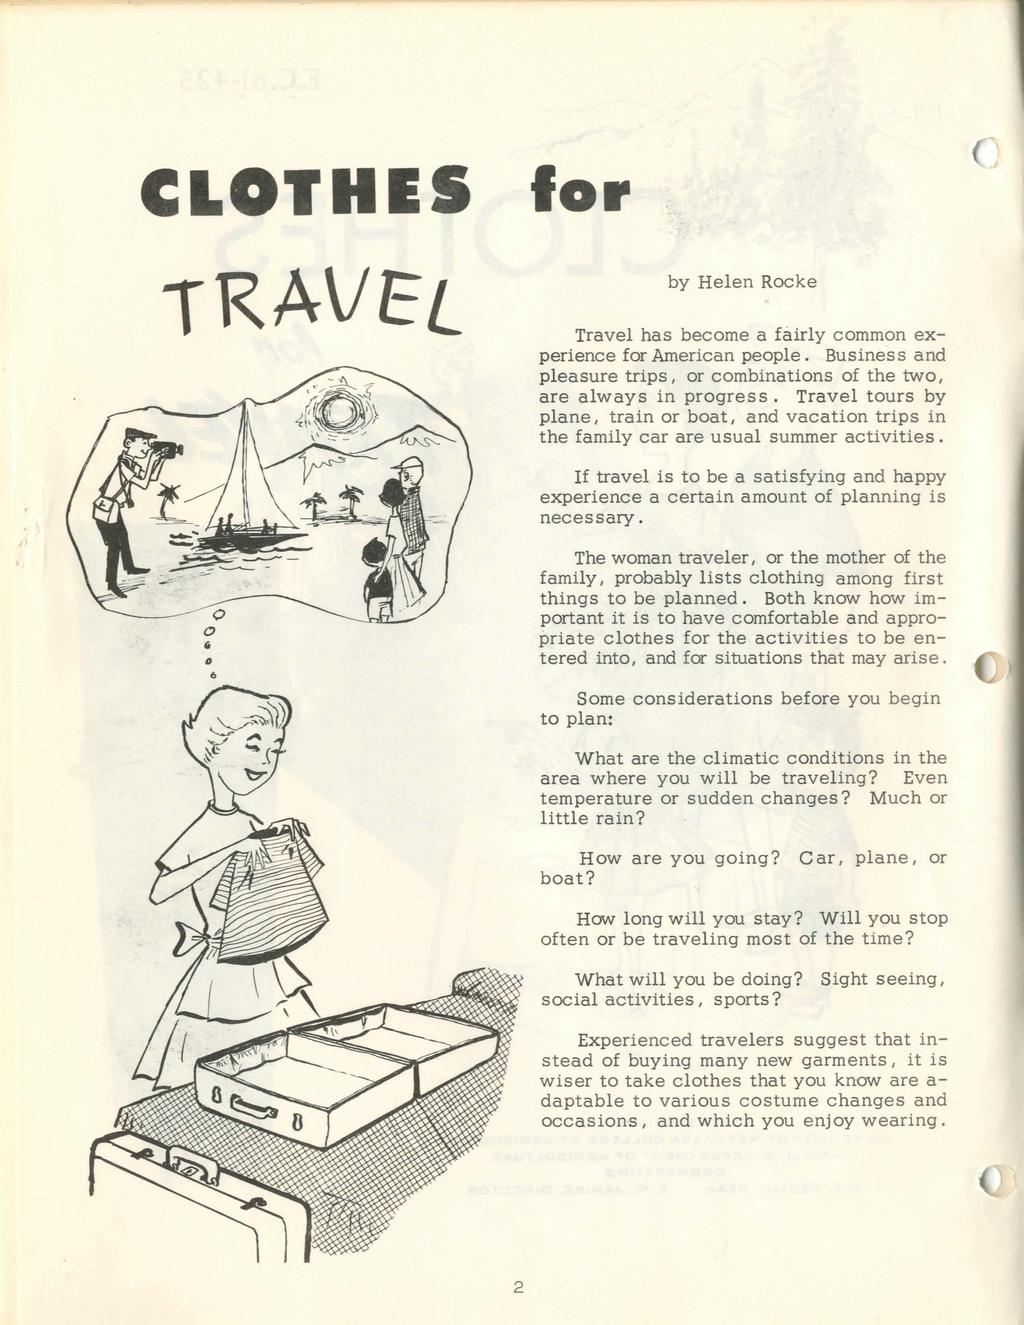 CLOTHES TRAVEL for by Helen Rocke Travel has become a fairly common experience for American people. Business and pleasure trips, or combinations of the two, are always in progress.